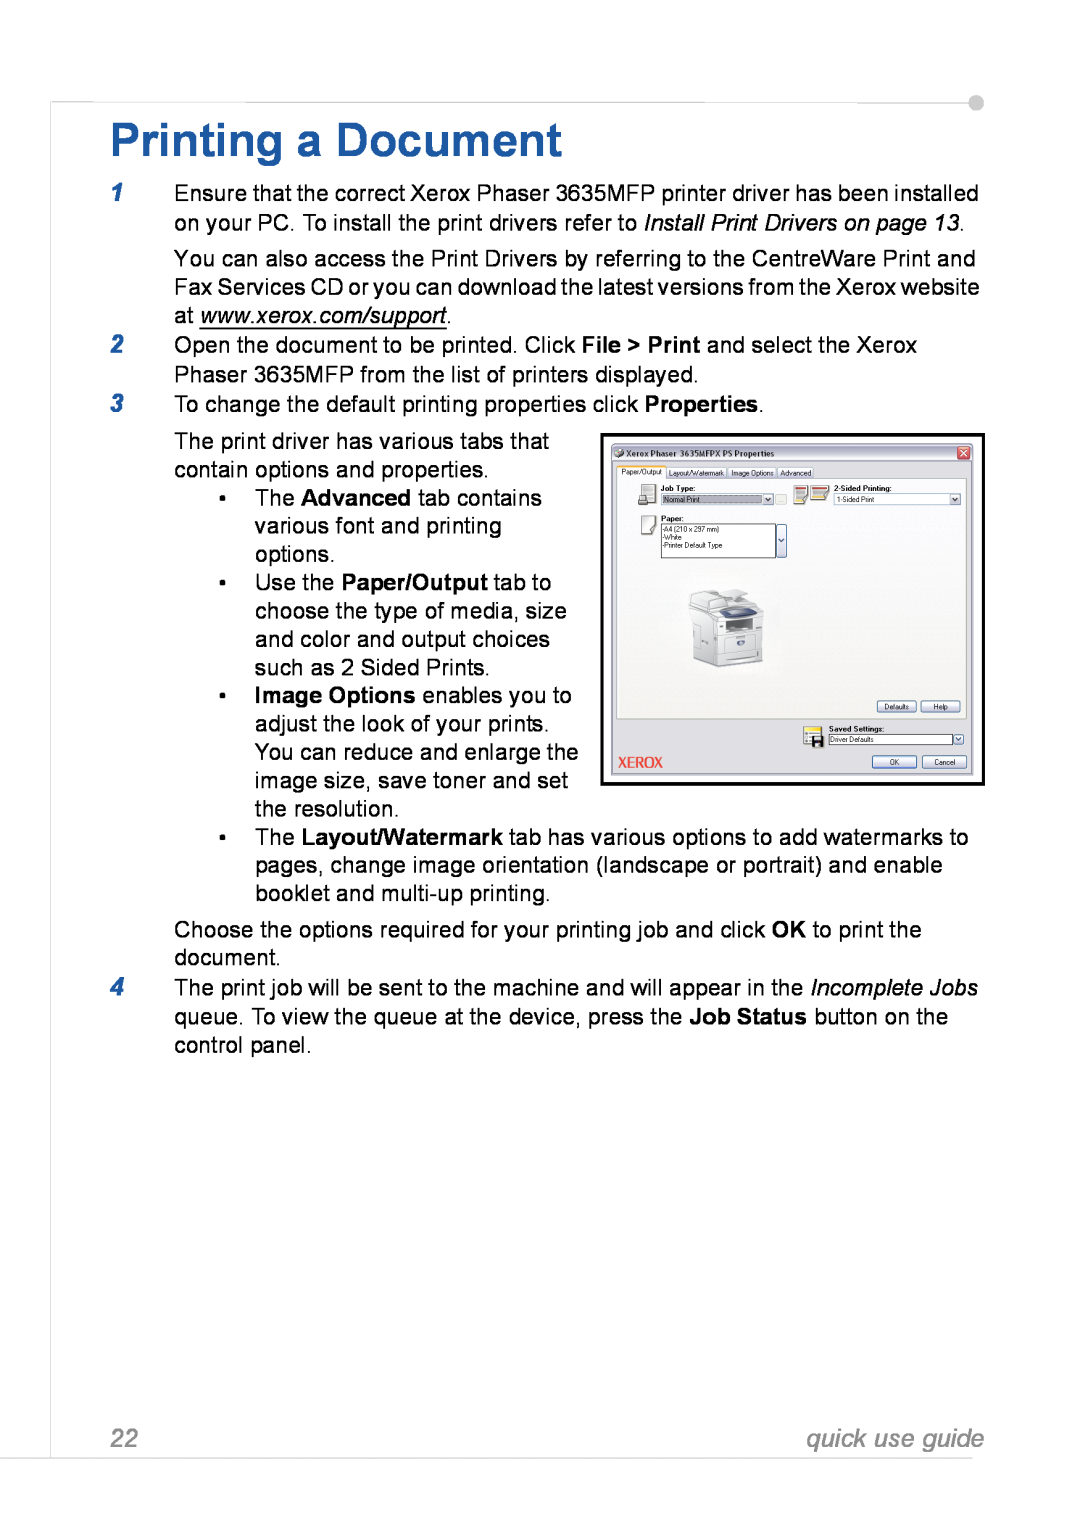 Xerox 3635MFP manual Printing a Document, quick use guide 